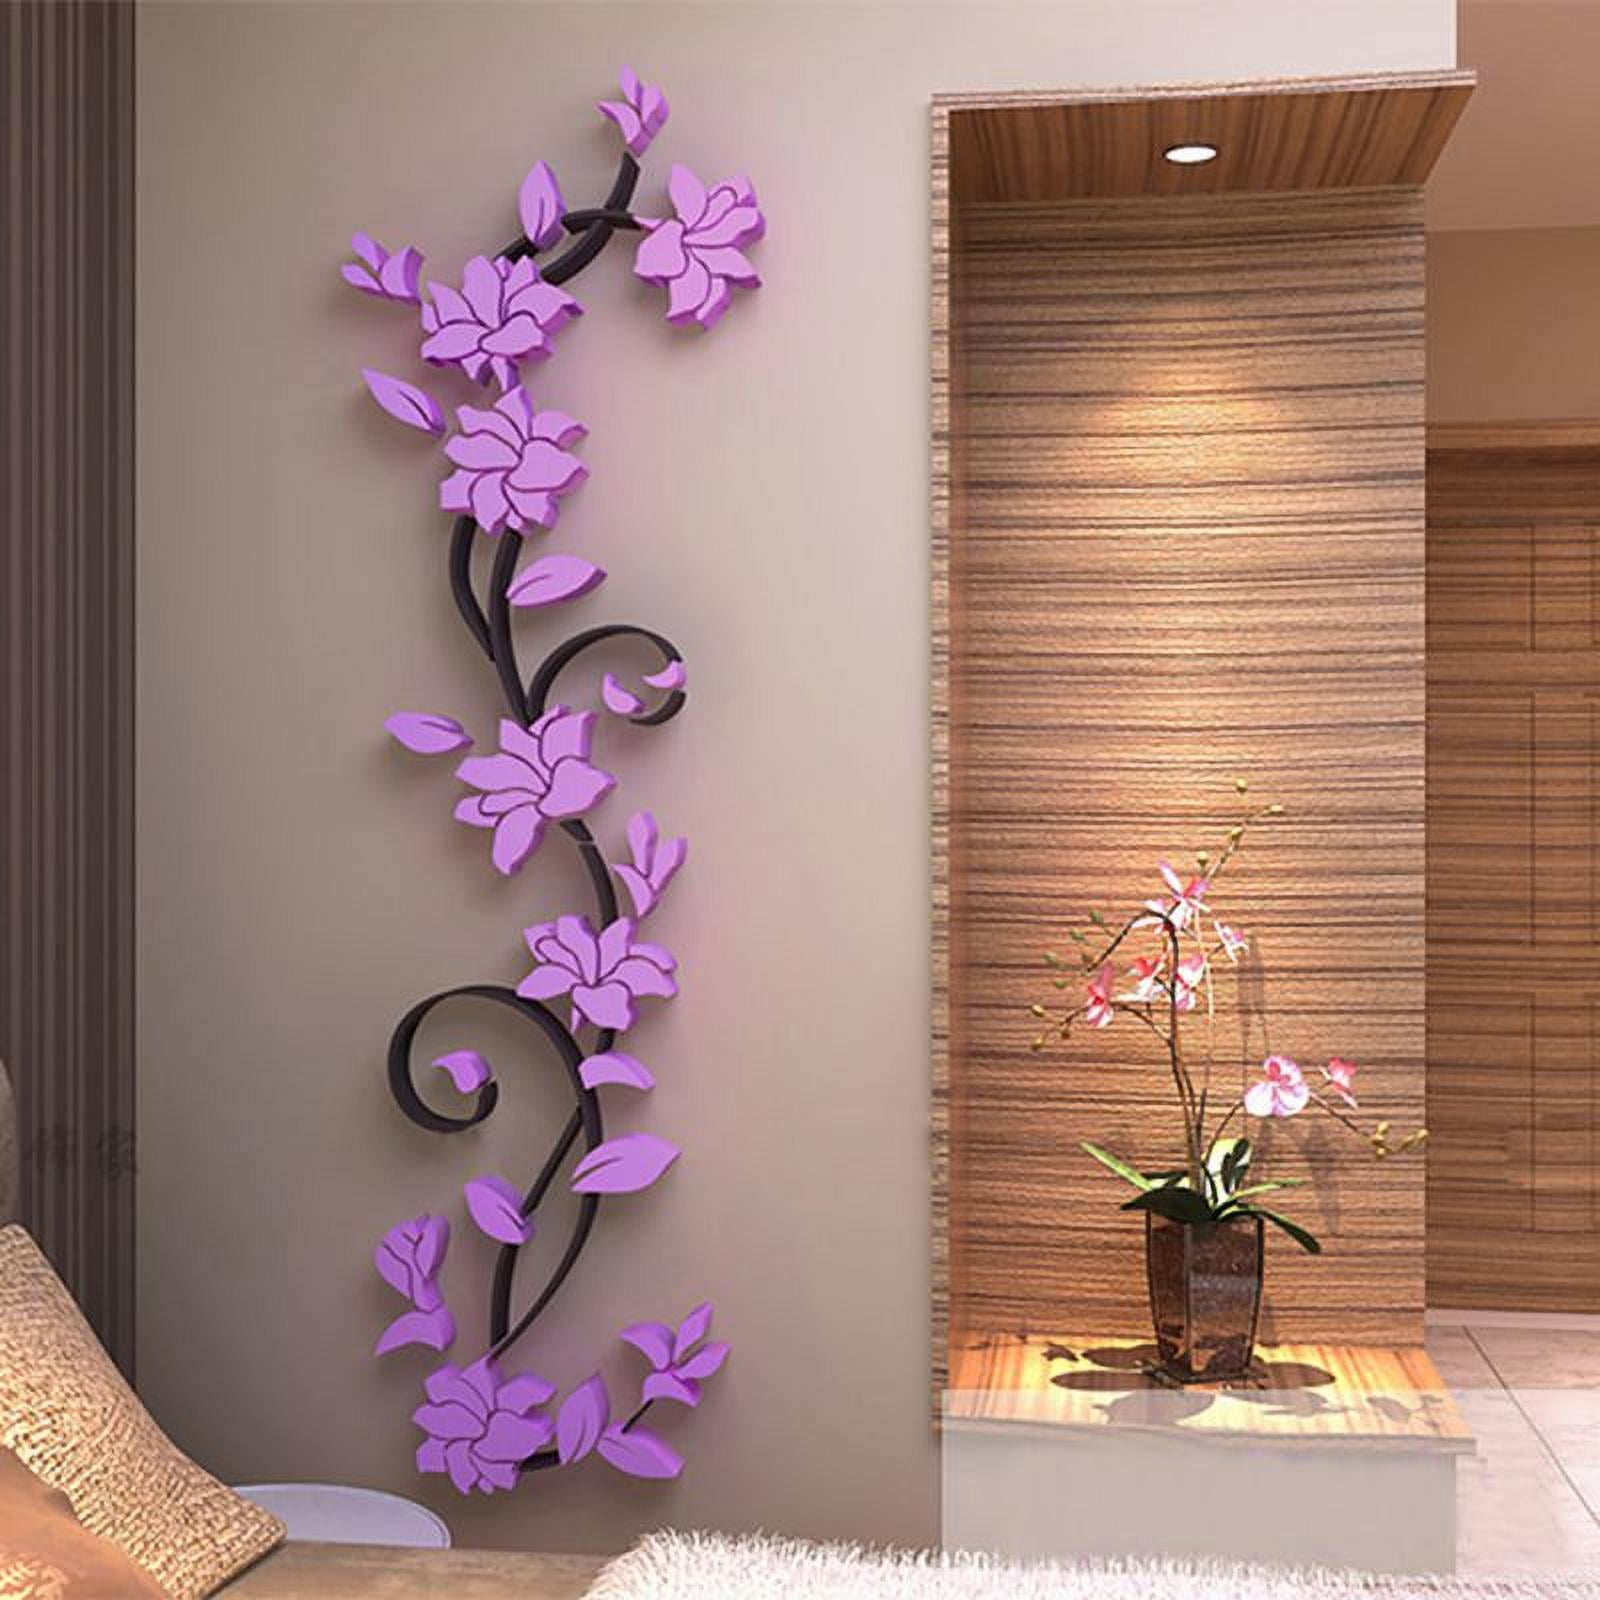 3D Lotus Flower Art Wall Sticker Room Home Background DIY PVC Removable Decal 